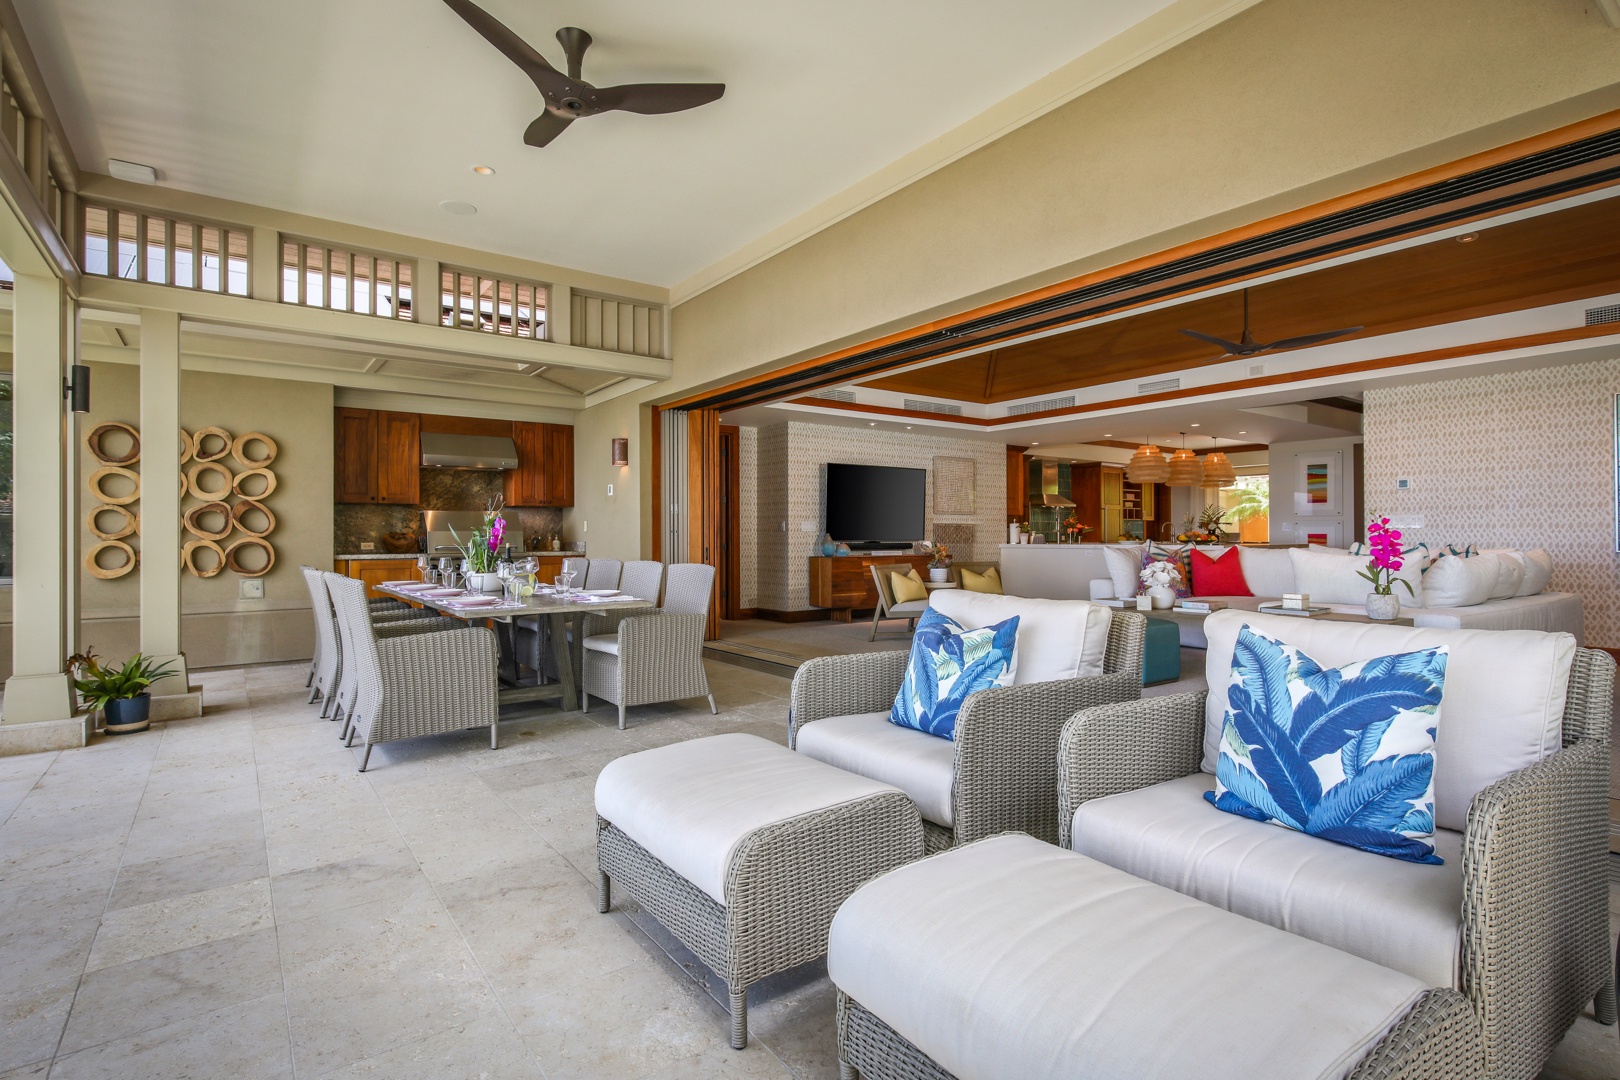 Kailua Kona Vacation Rentals, 4BD Hainoa Estate (122) at Four Seasons Resort at Hualalai - Elegant lounge seating and a gorgeous formal dining table with BBQ grill and prep area.